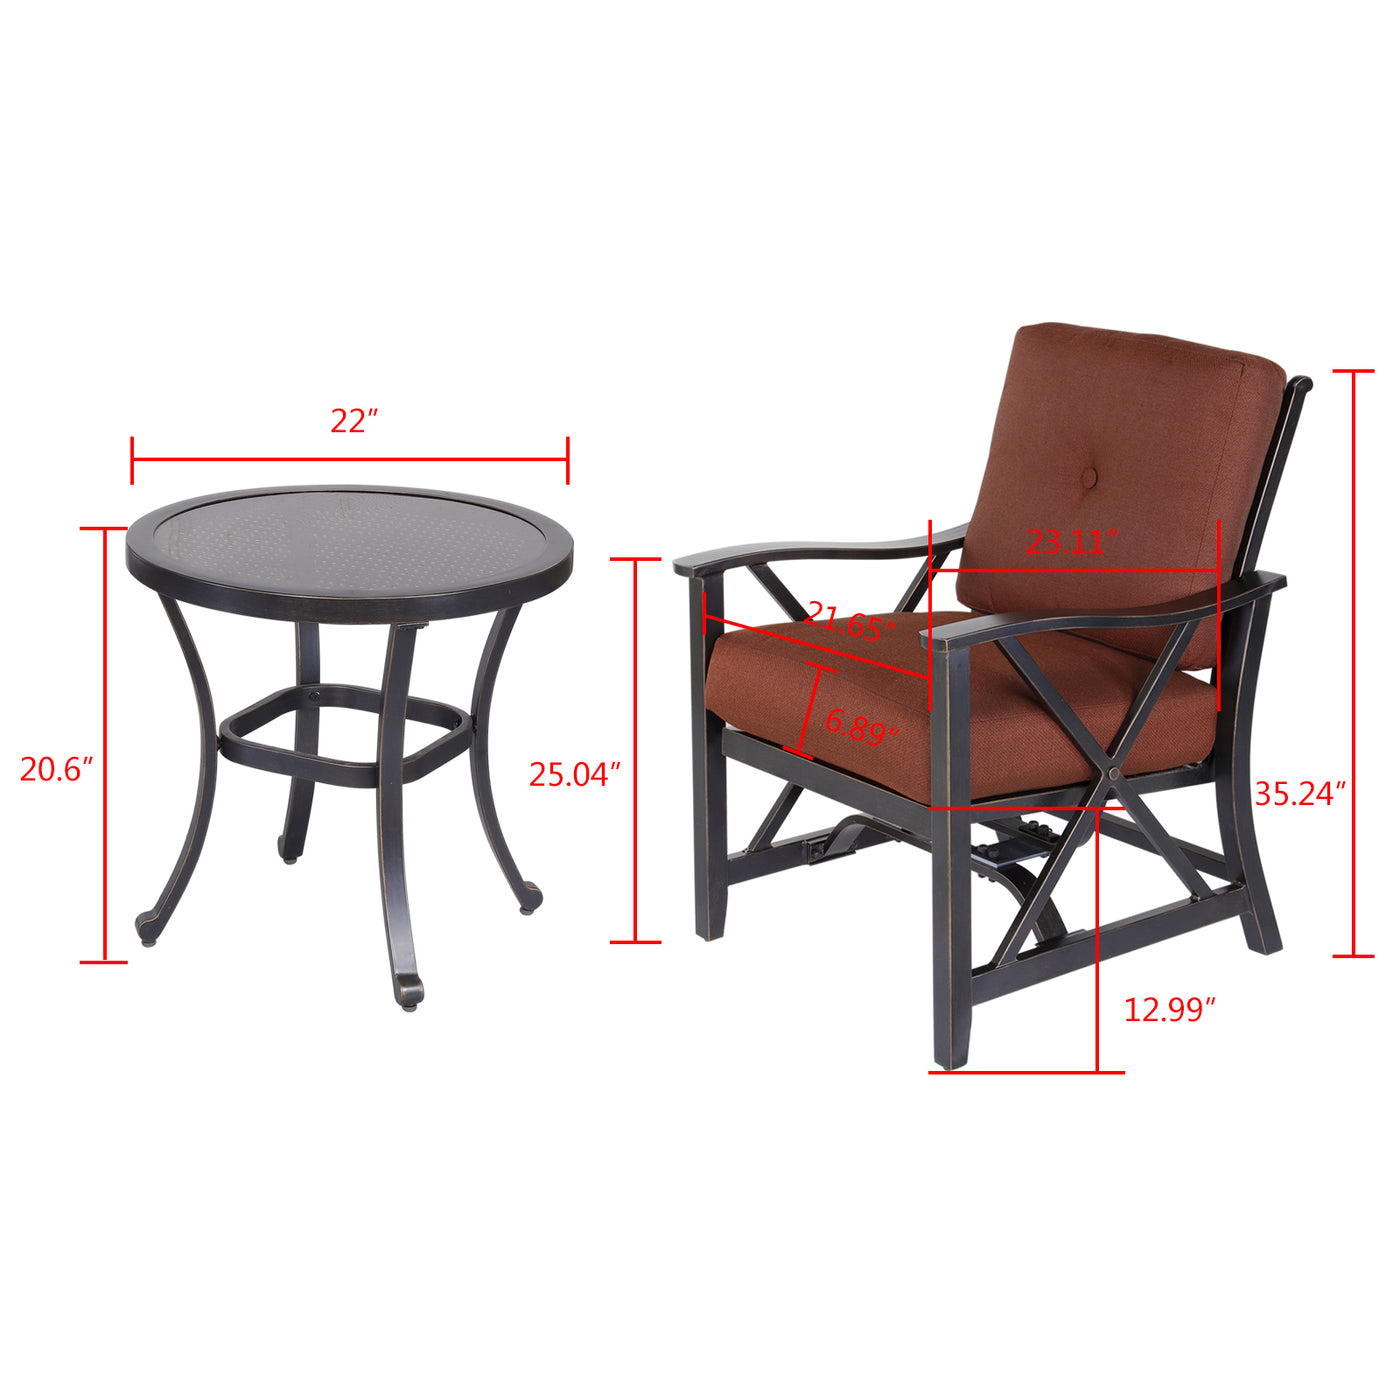 3 PCS Bistro Set Stationary Spring Chairs & Alum Wicker Side Table w/ Glass Top